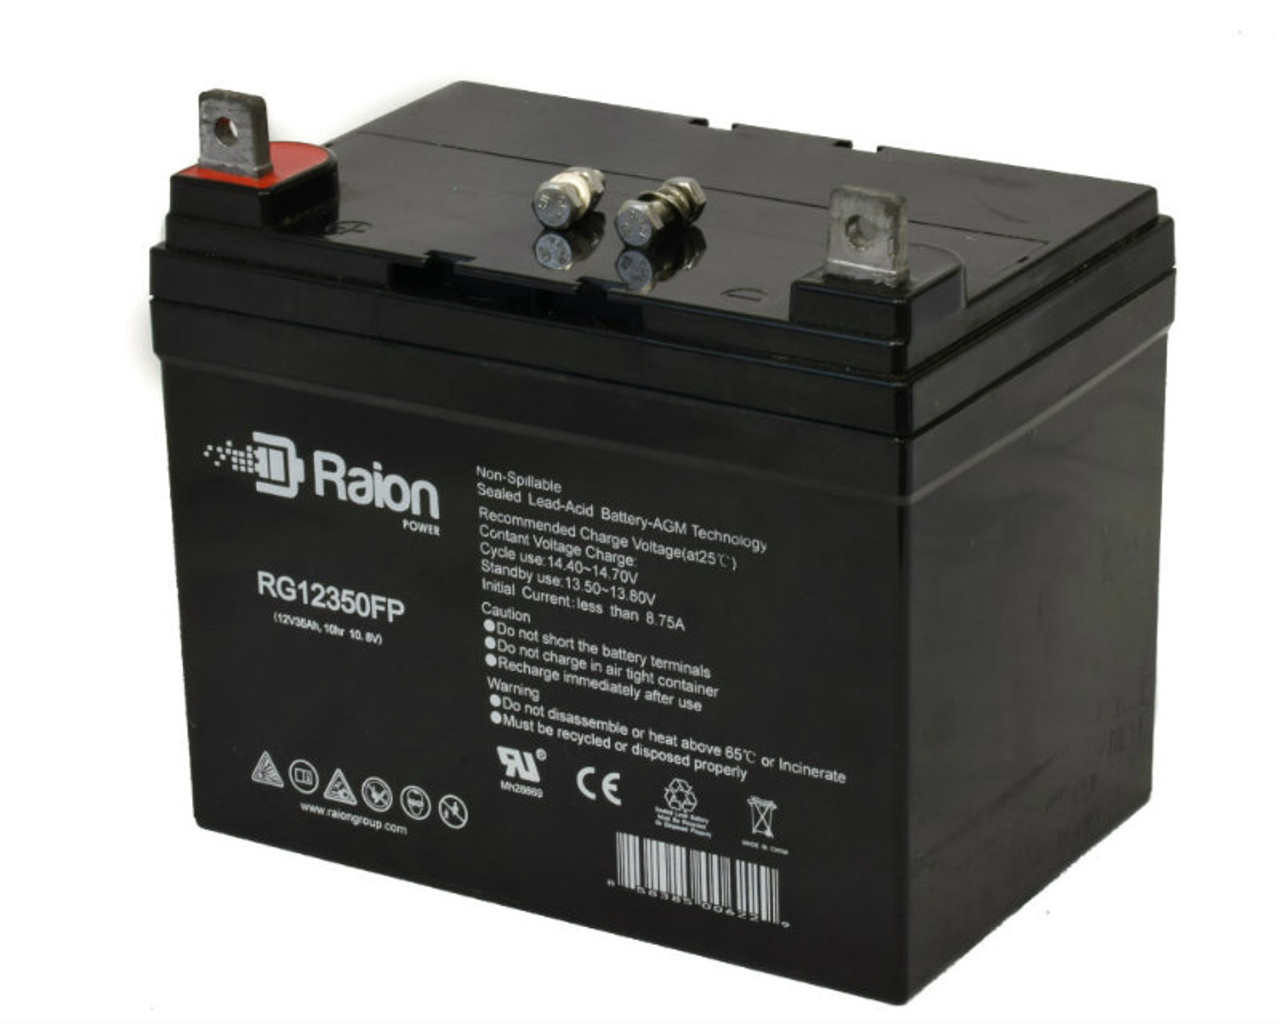 Raion Power Replacement 12V 35Ah RG12350FP Battery for Speedex Tractor 1320